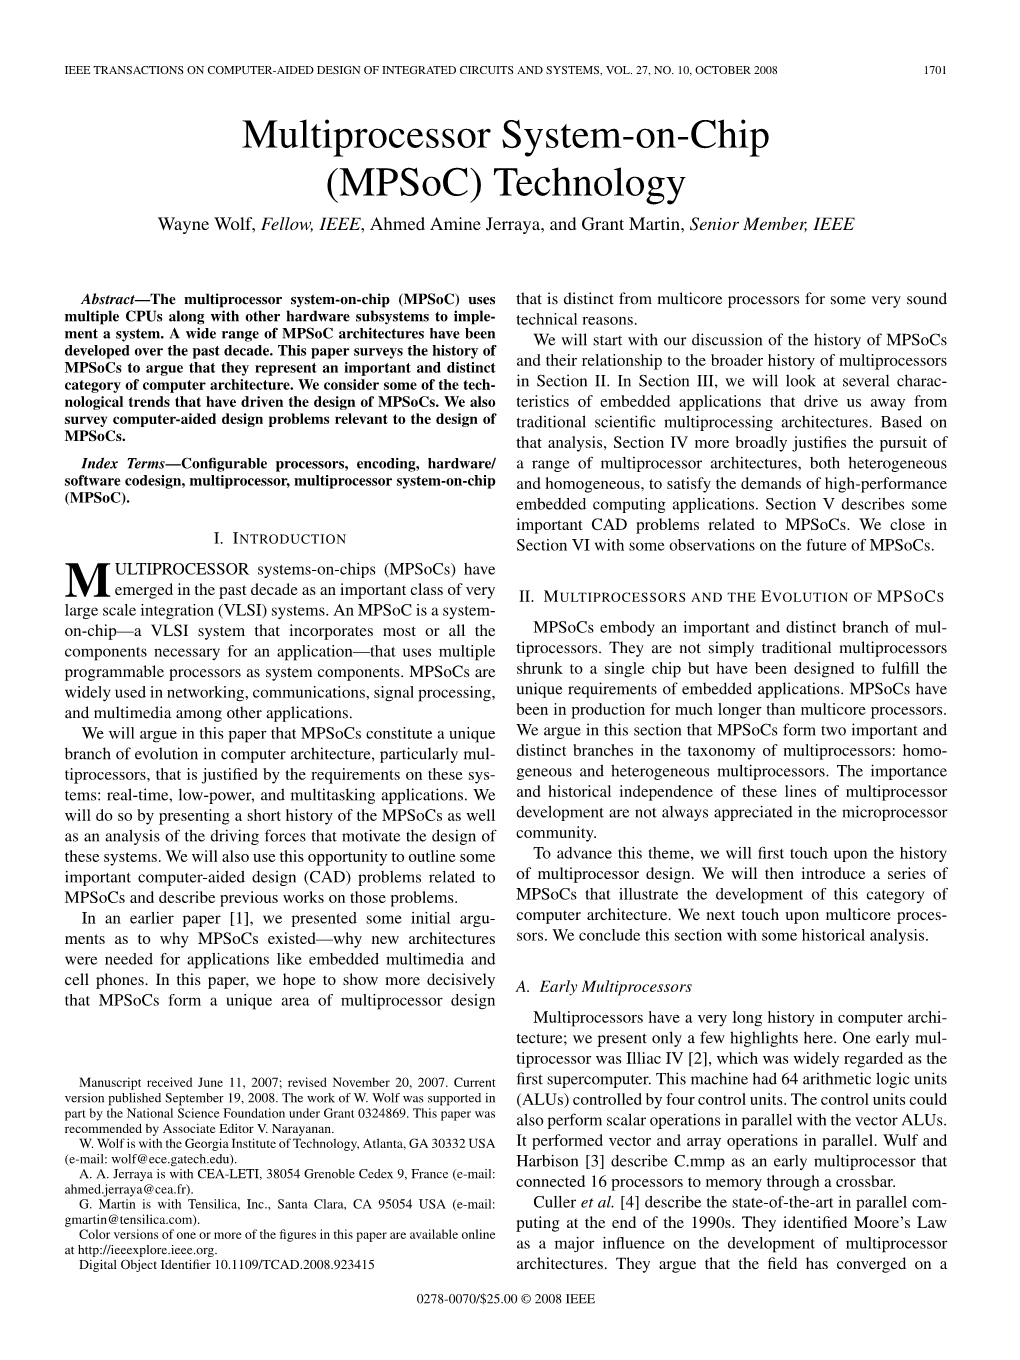 Multiprocessor System-On-Chip (Mpsoc) Technology Wayne Wolf, Fellow, IEEE, Ahmed Amine Jerraya, and Grant Martin, Senior Member, IEEE